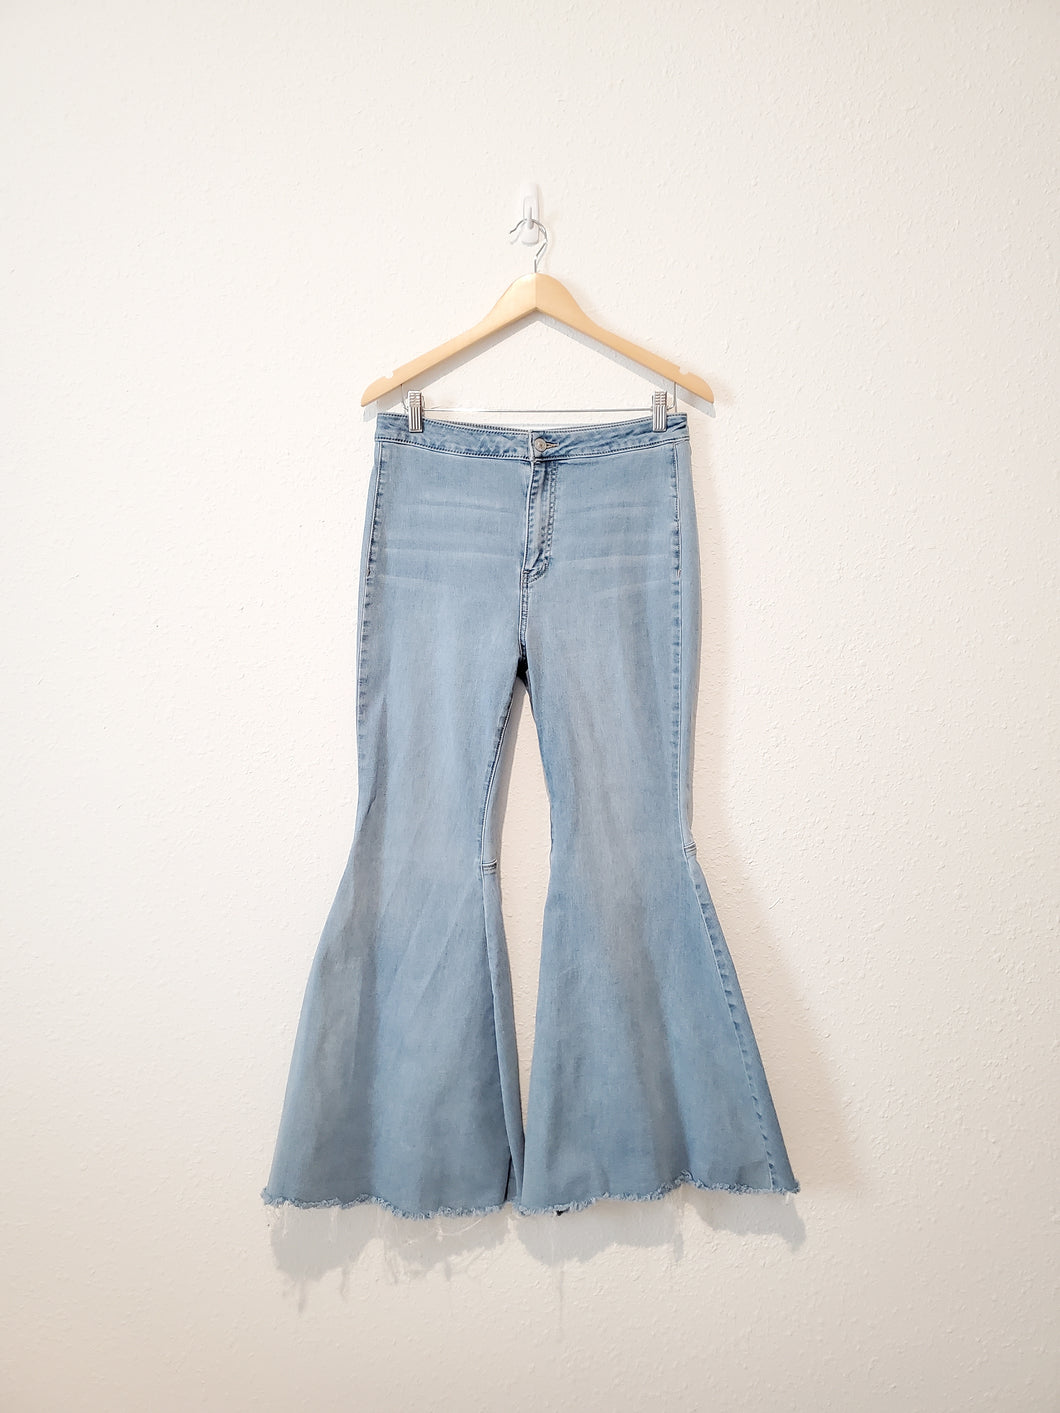 Free People Flare Jeans (30)